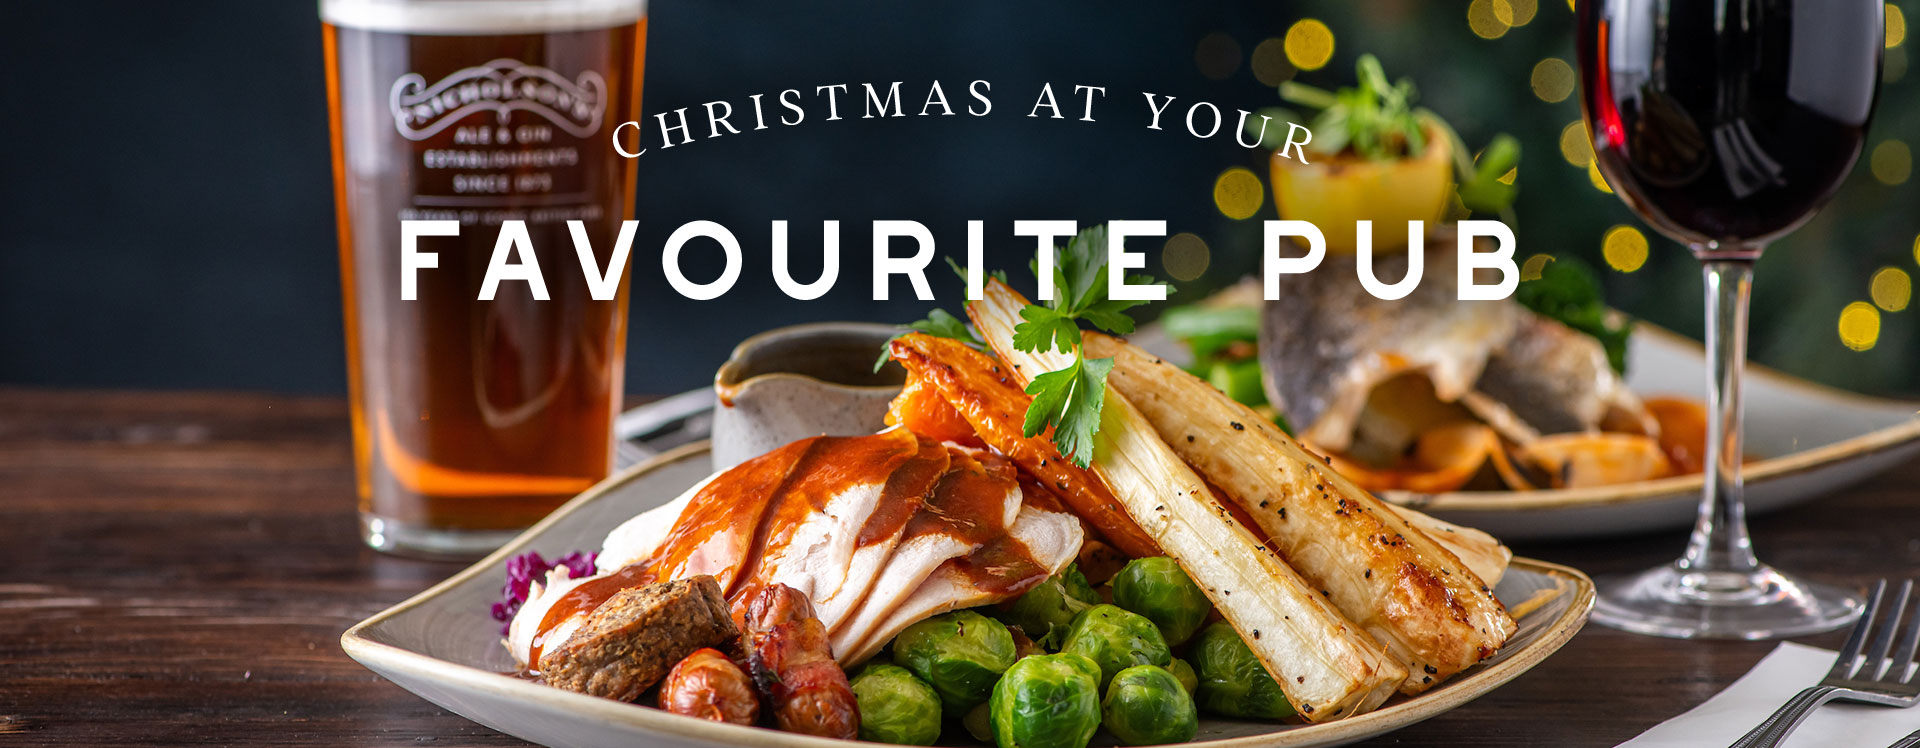 Christmas day menu at The St George's Tavern